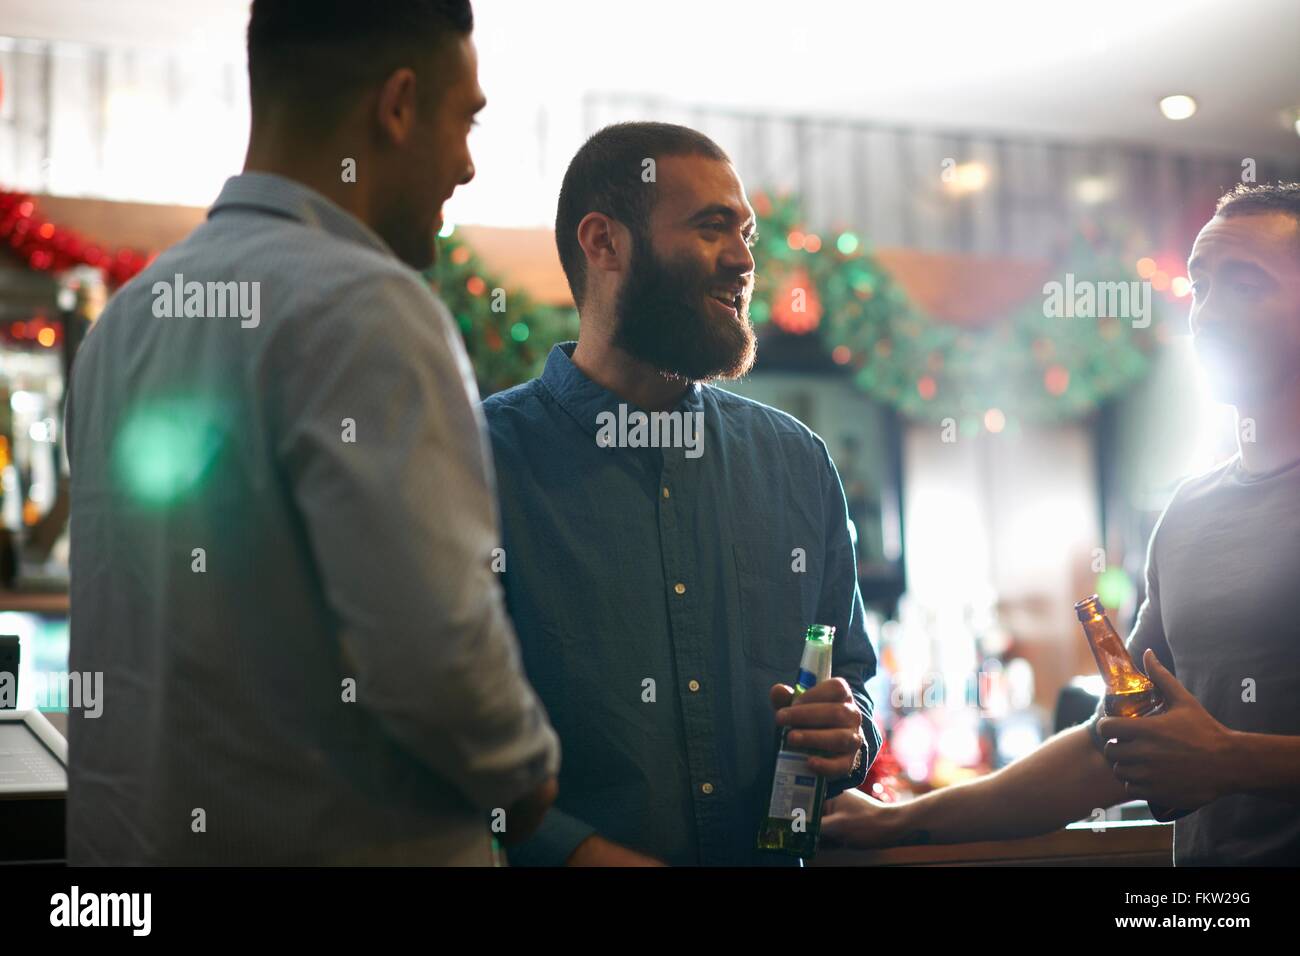 Young men in public house holding beer bottles leaning against counter smiling Stock Photo